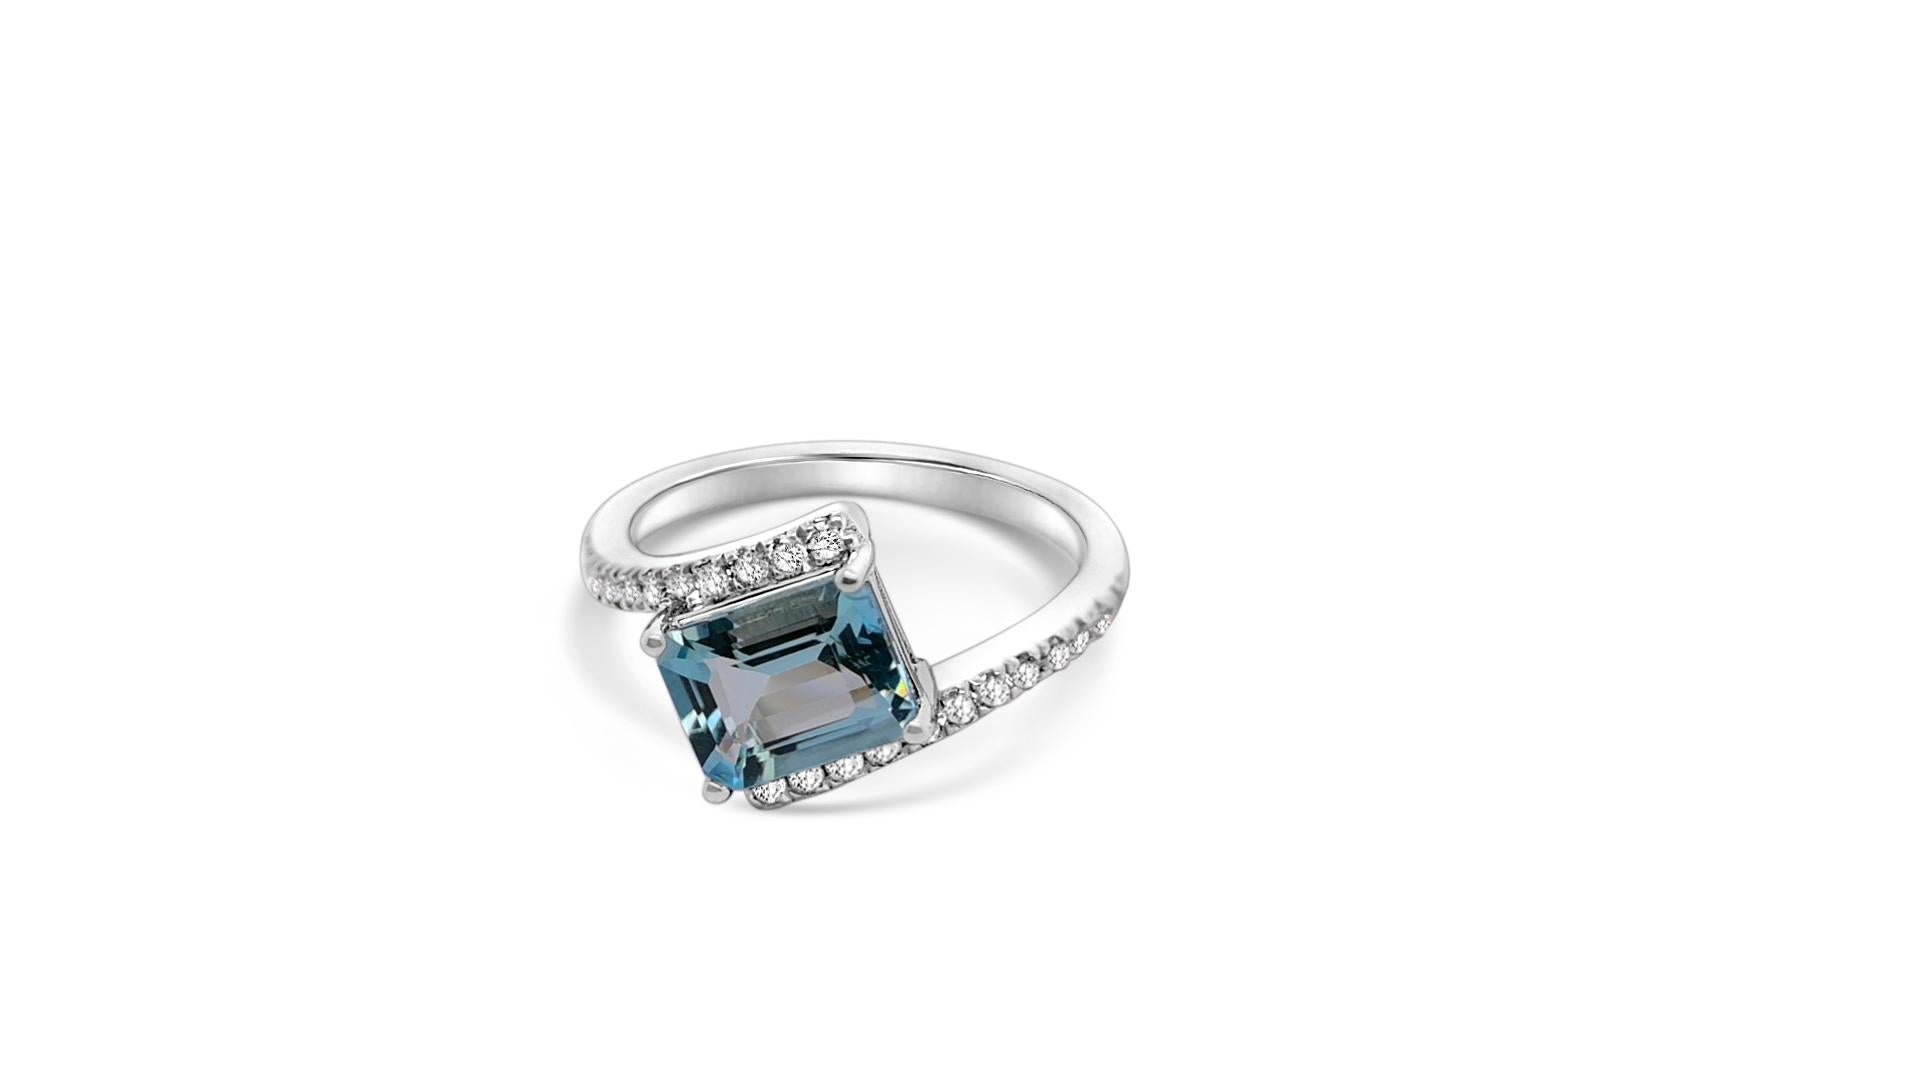 Art Deco 2.03 Ct Aquamarine Ethical Ring 92.5 Sterling Silver Engagement Ring For Women's For Sale